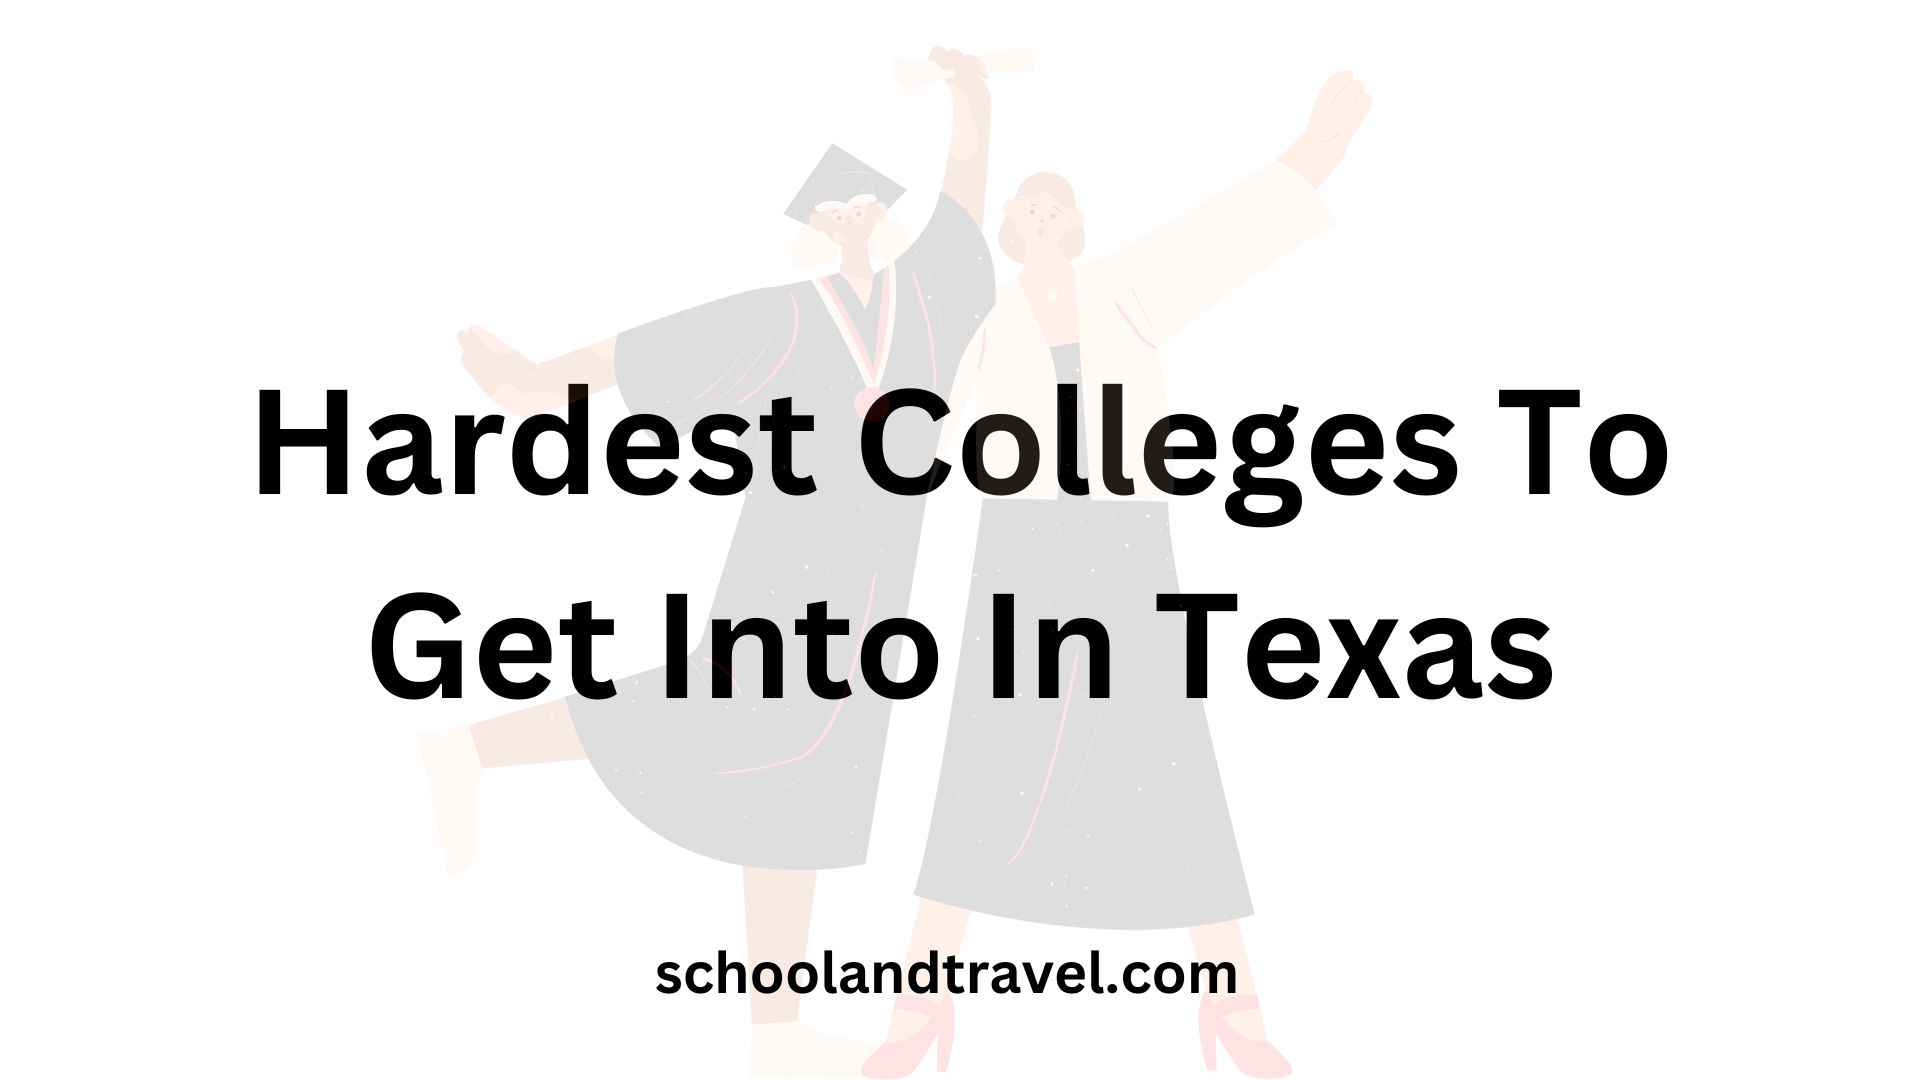 Hardest Colleges To Get Into In Texas